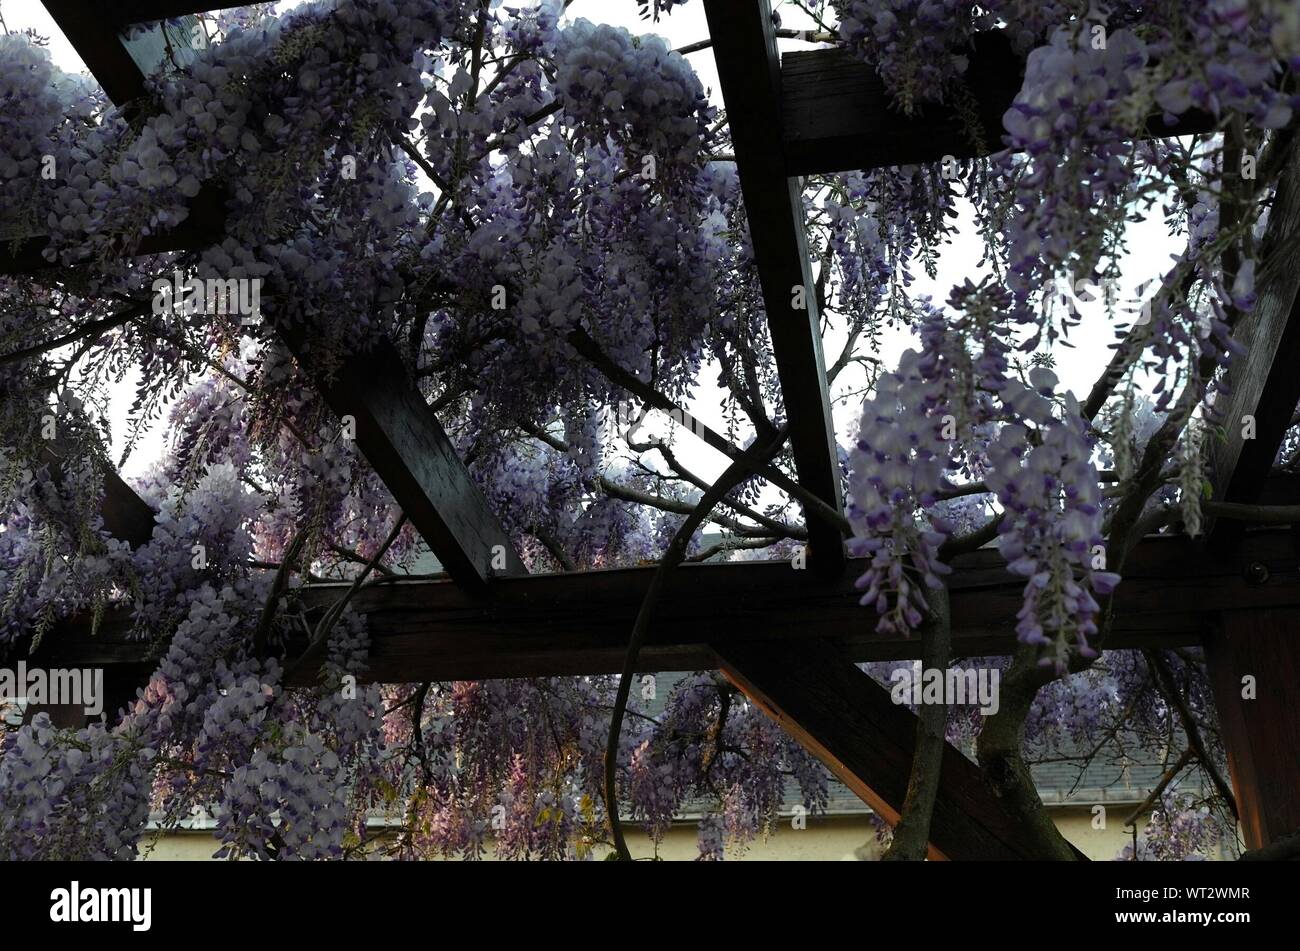 Low Angle View Of Wisteria Flowers Hanging On Ceiling Stock Photo ...